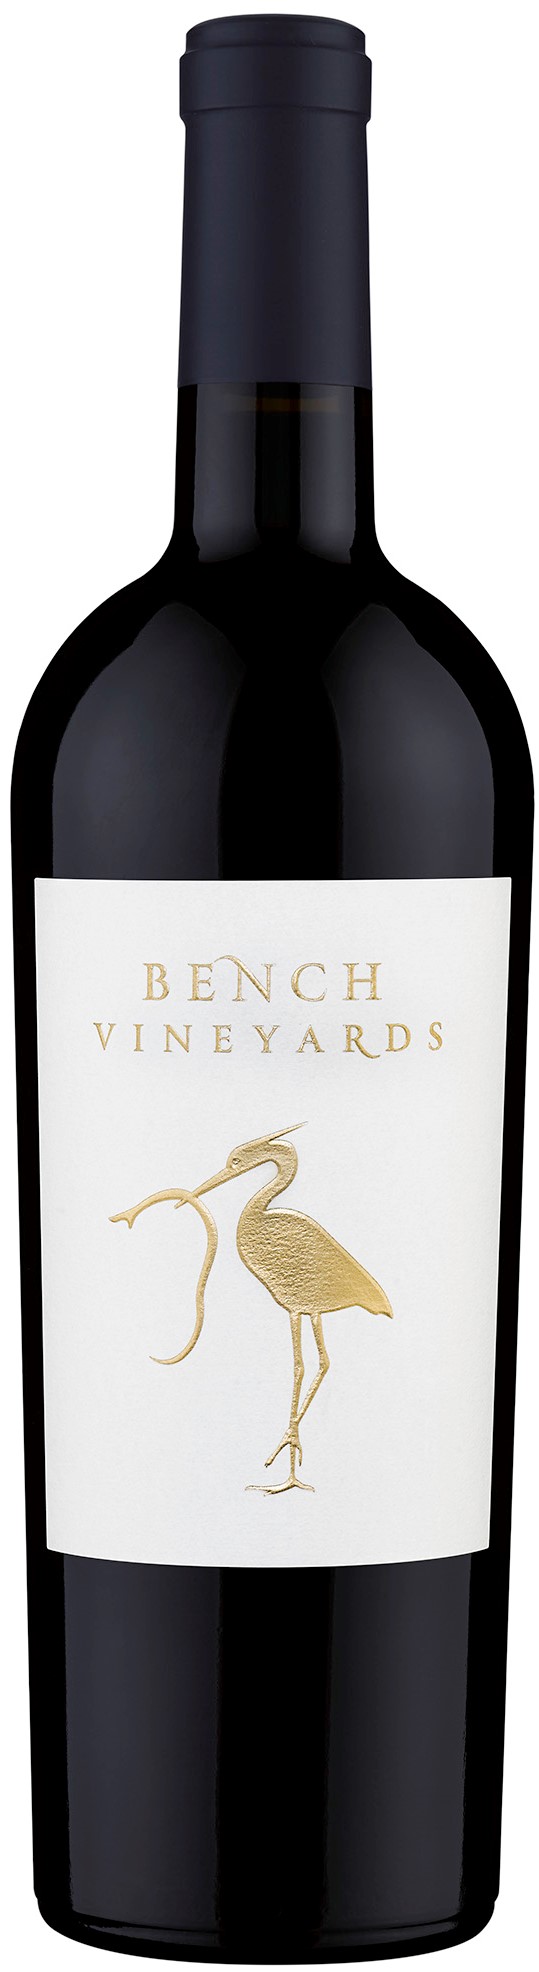 Product Image for 2015 Bench Vineyards Cabernet Sauvignon, SLD